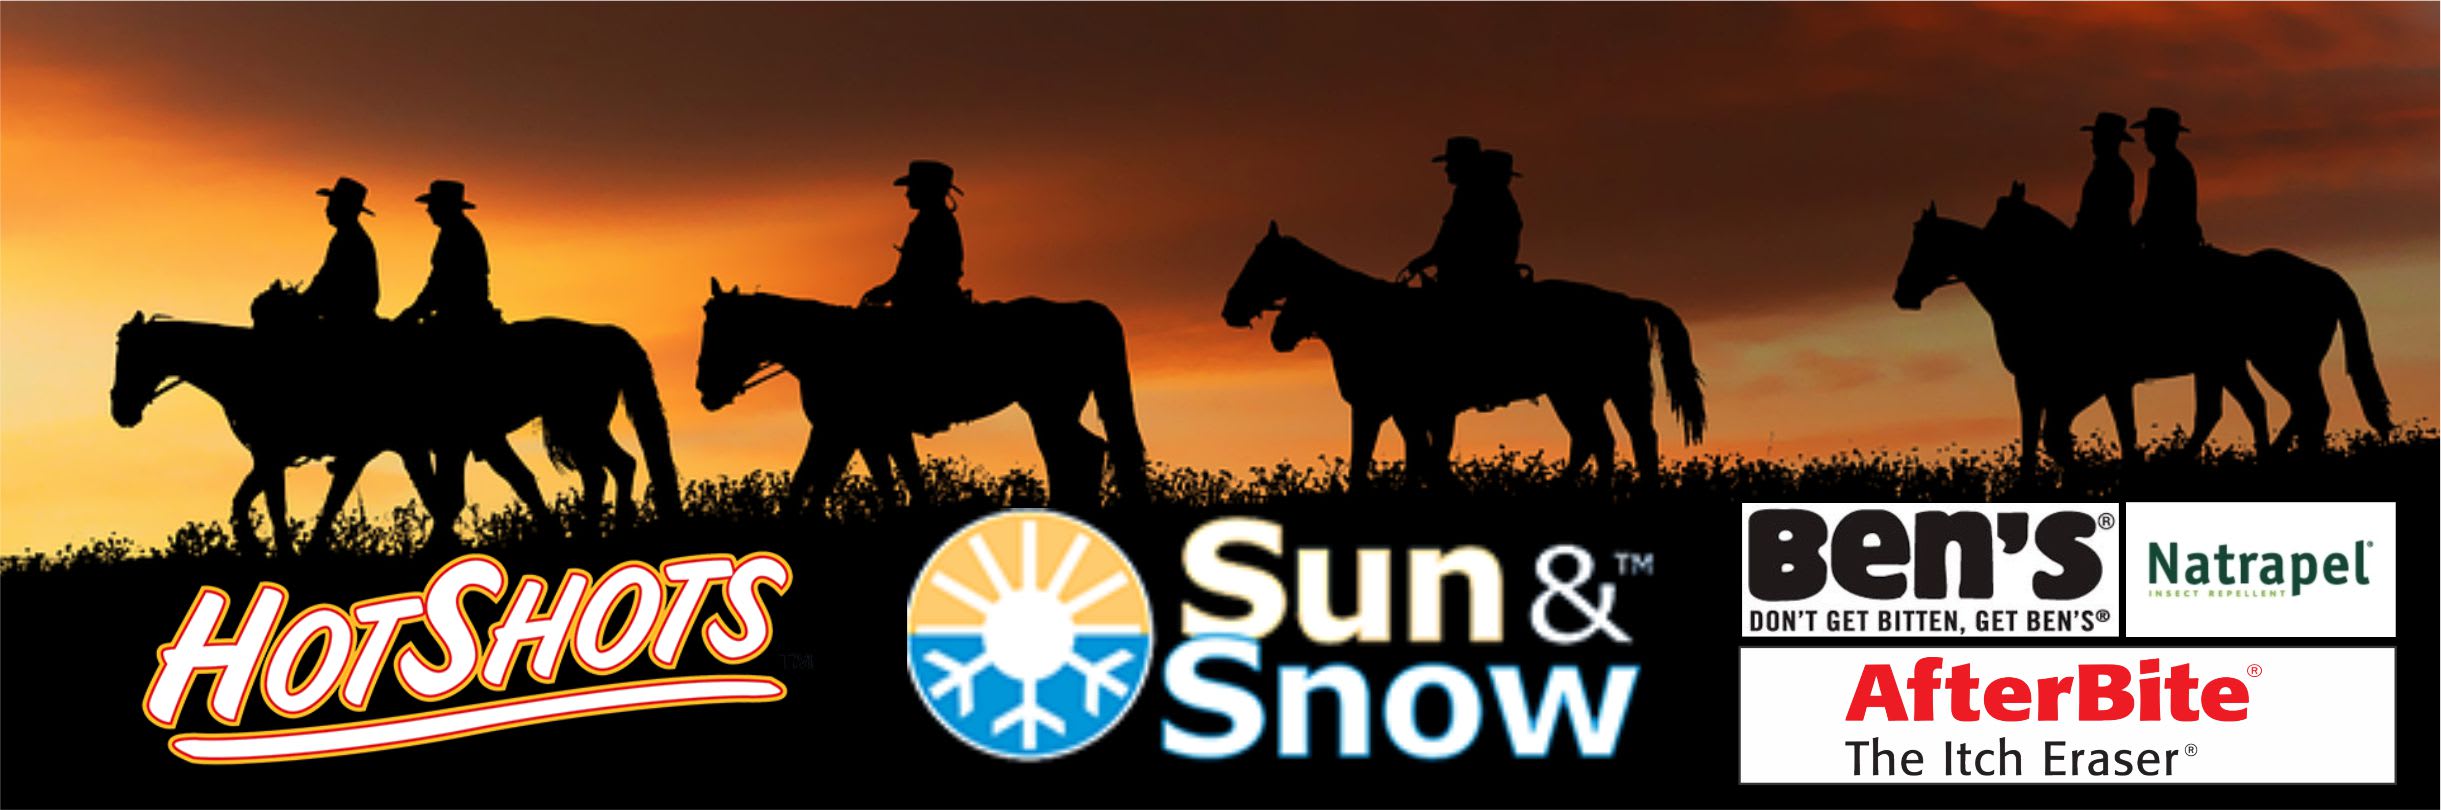 new products for the horse owner - warmth, sun and skin protection, bug repellants, afterbite